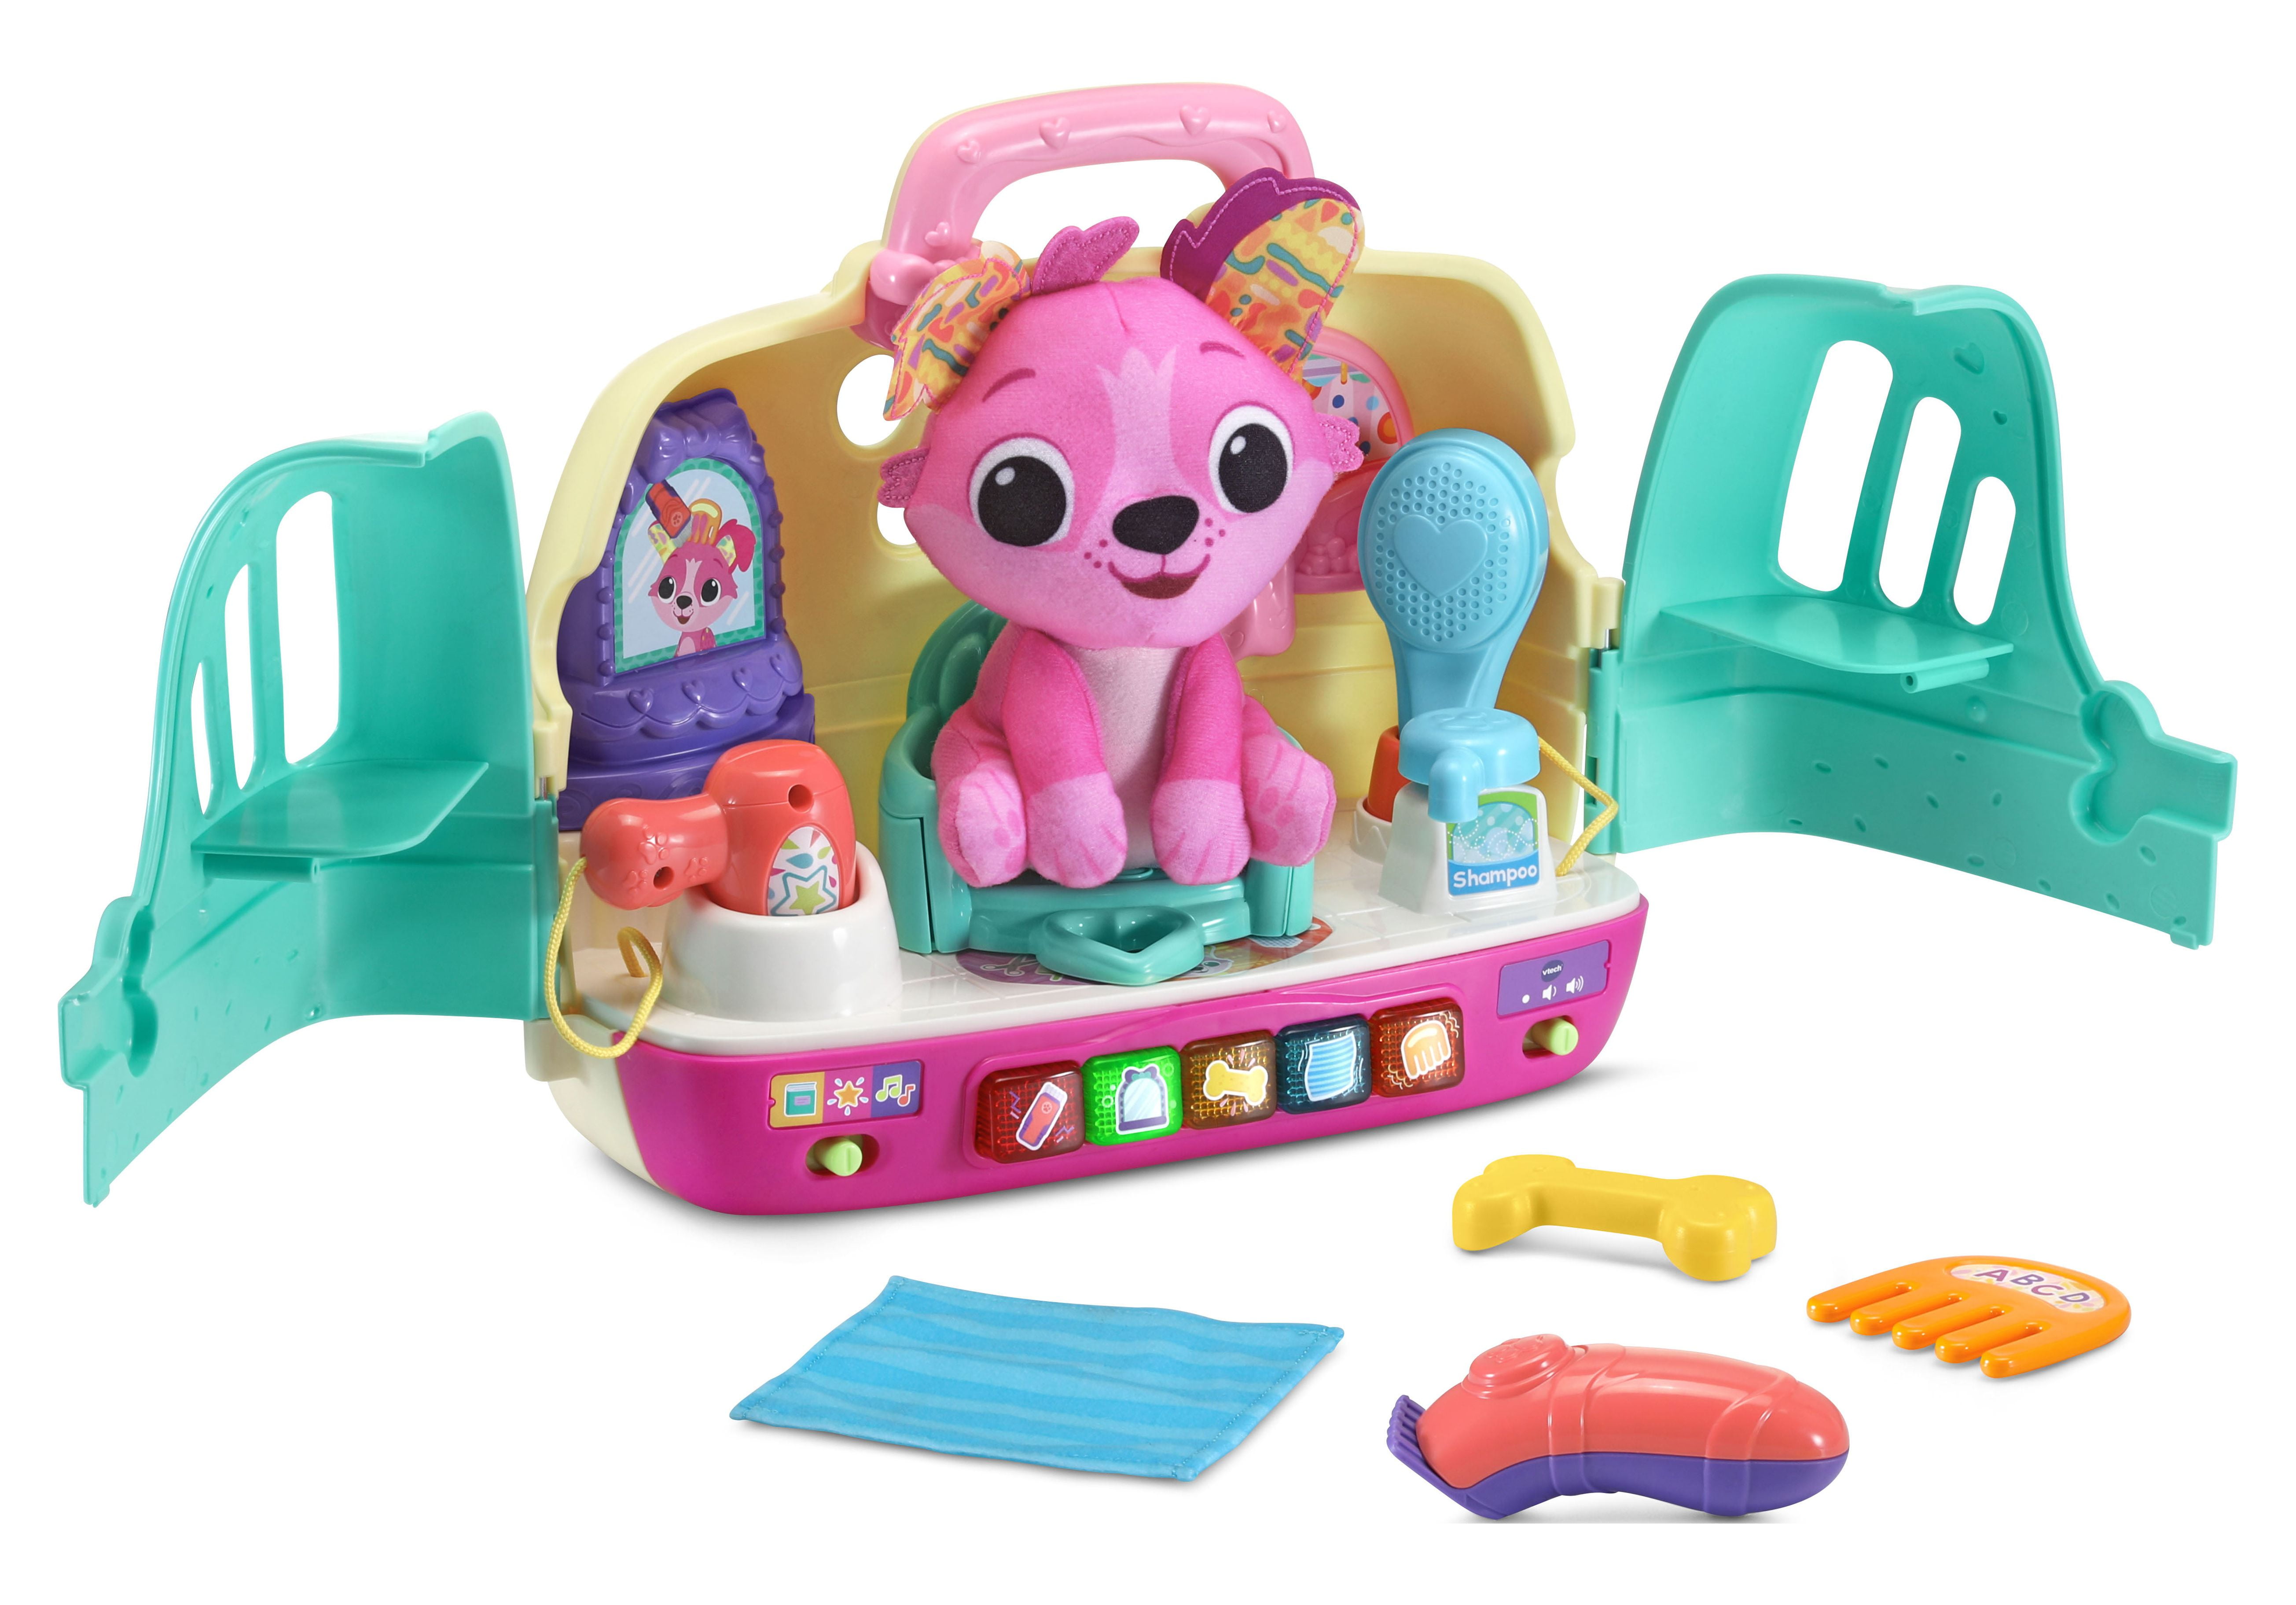 Shop for New In, Vtech, Gifts